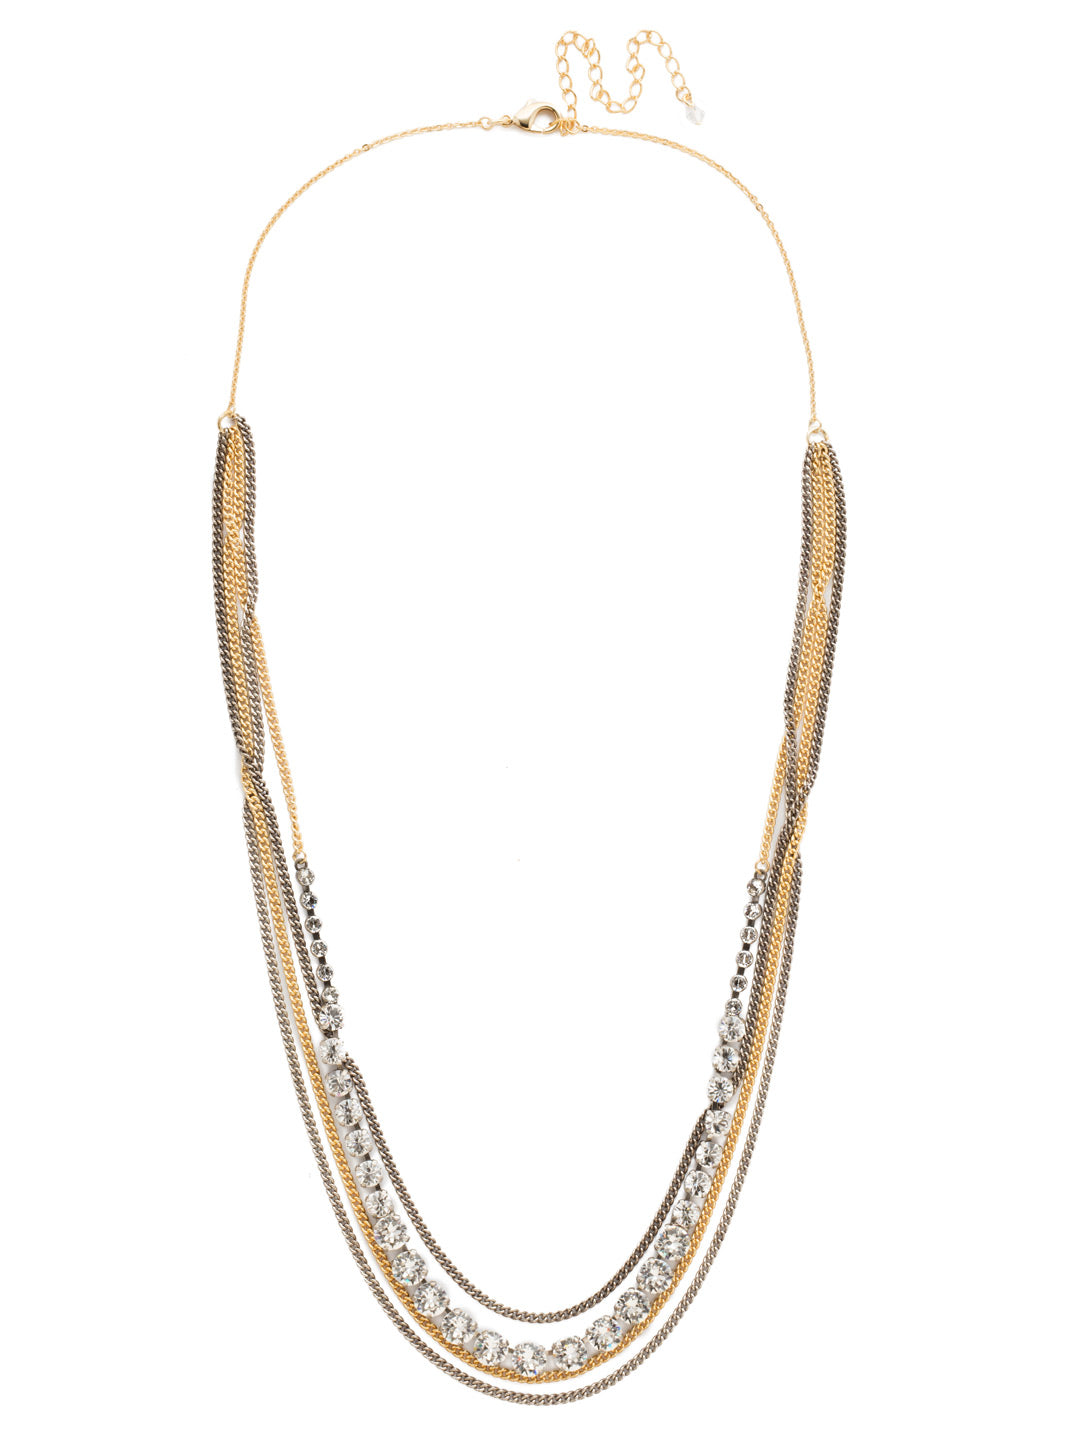 Layer It On Multi-Strand Layered Necklace - NCR73MXCRY - <p>Styled for you. Rows of mixed metal chain and crystal intertwine in this quintessential long layered necklace! From Sorrelli's Crystal collection in our Mixed Metal finish.</p>